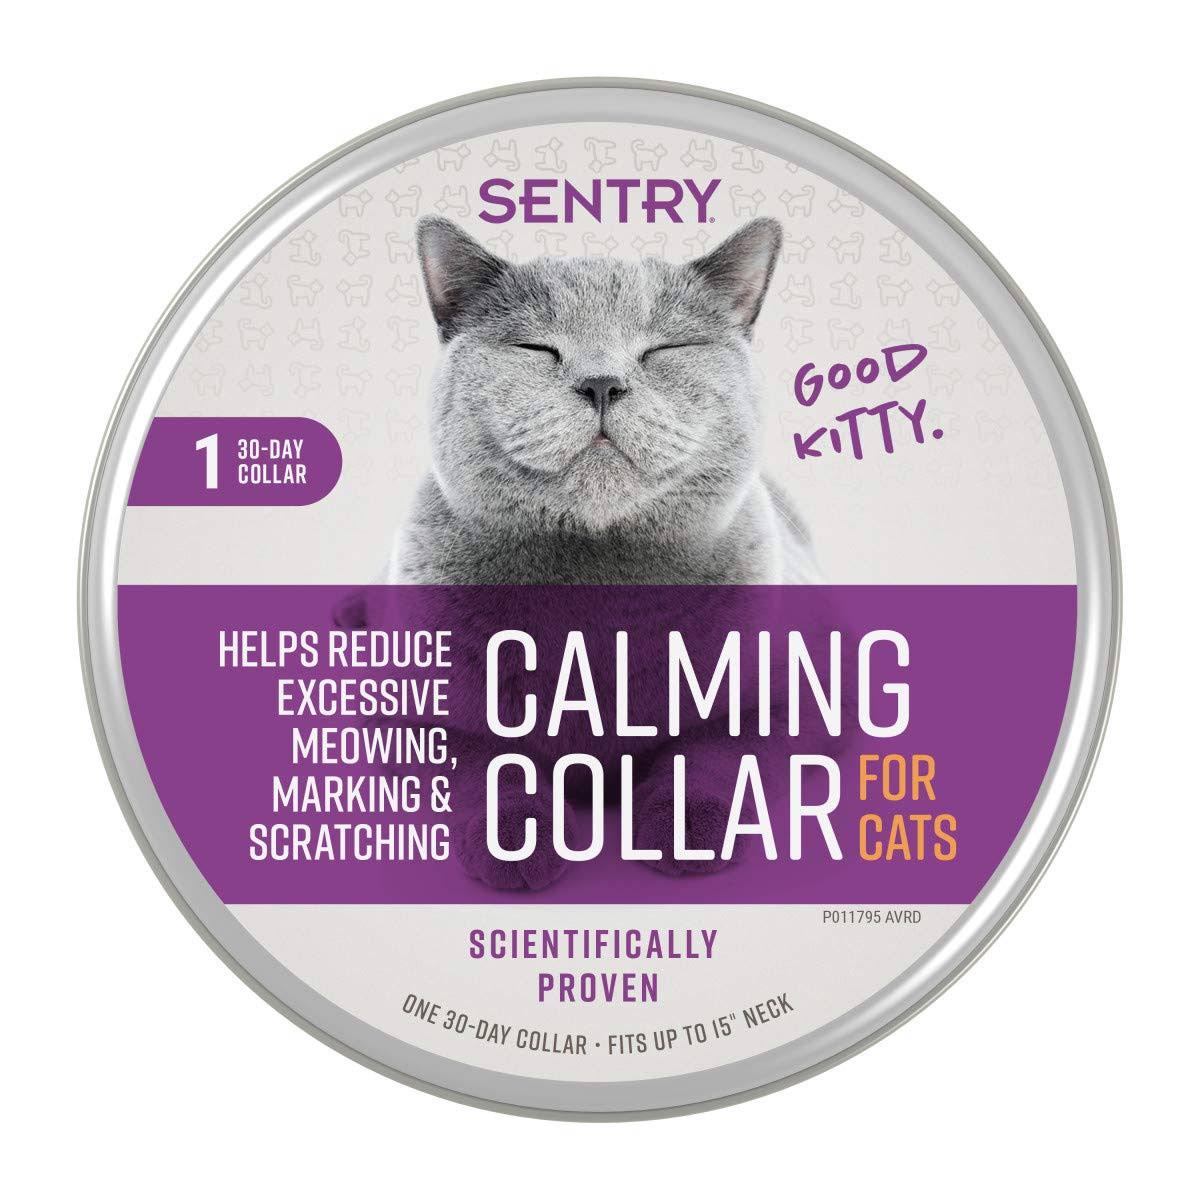 Sentry Good Kitty Calming Collar - for Cats, One Size, Fits All